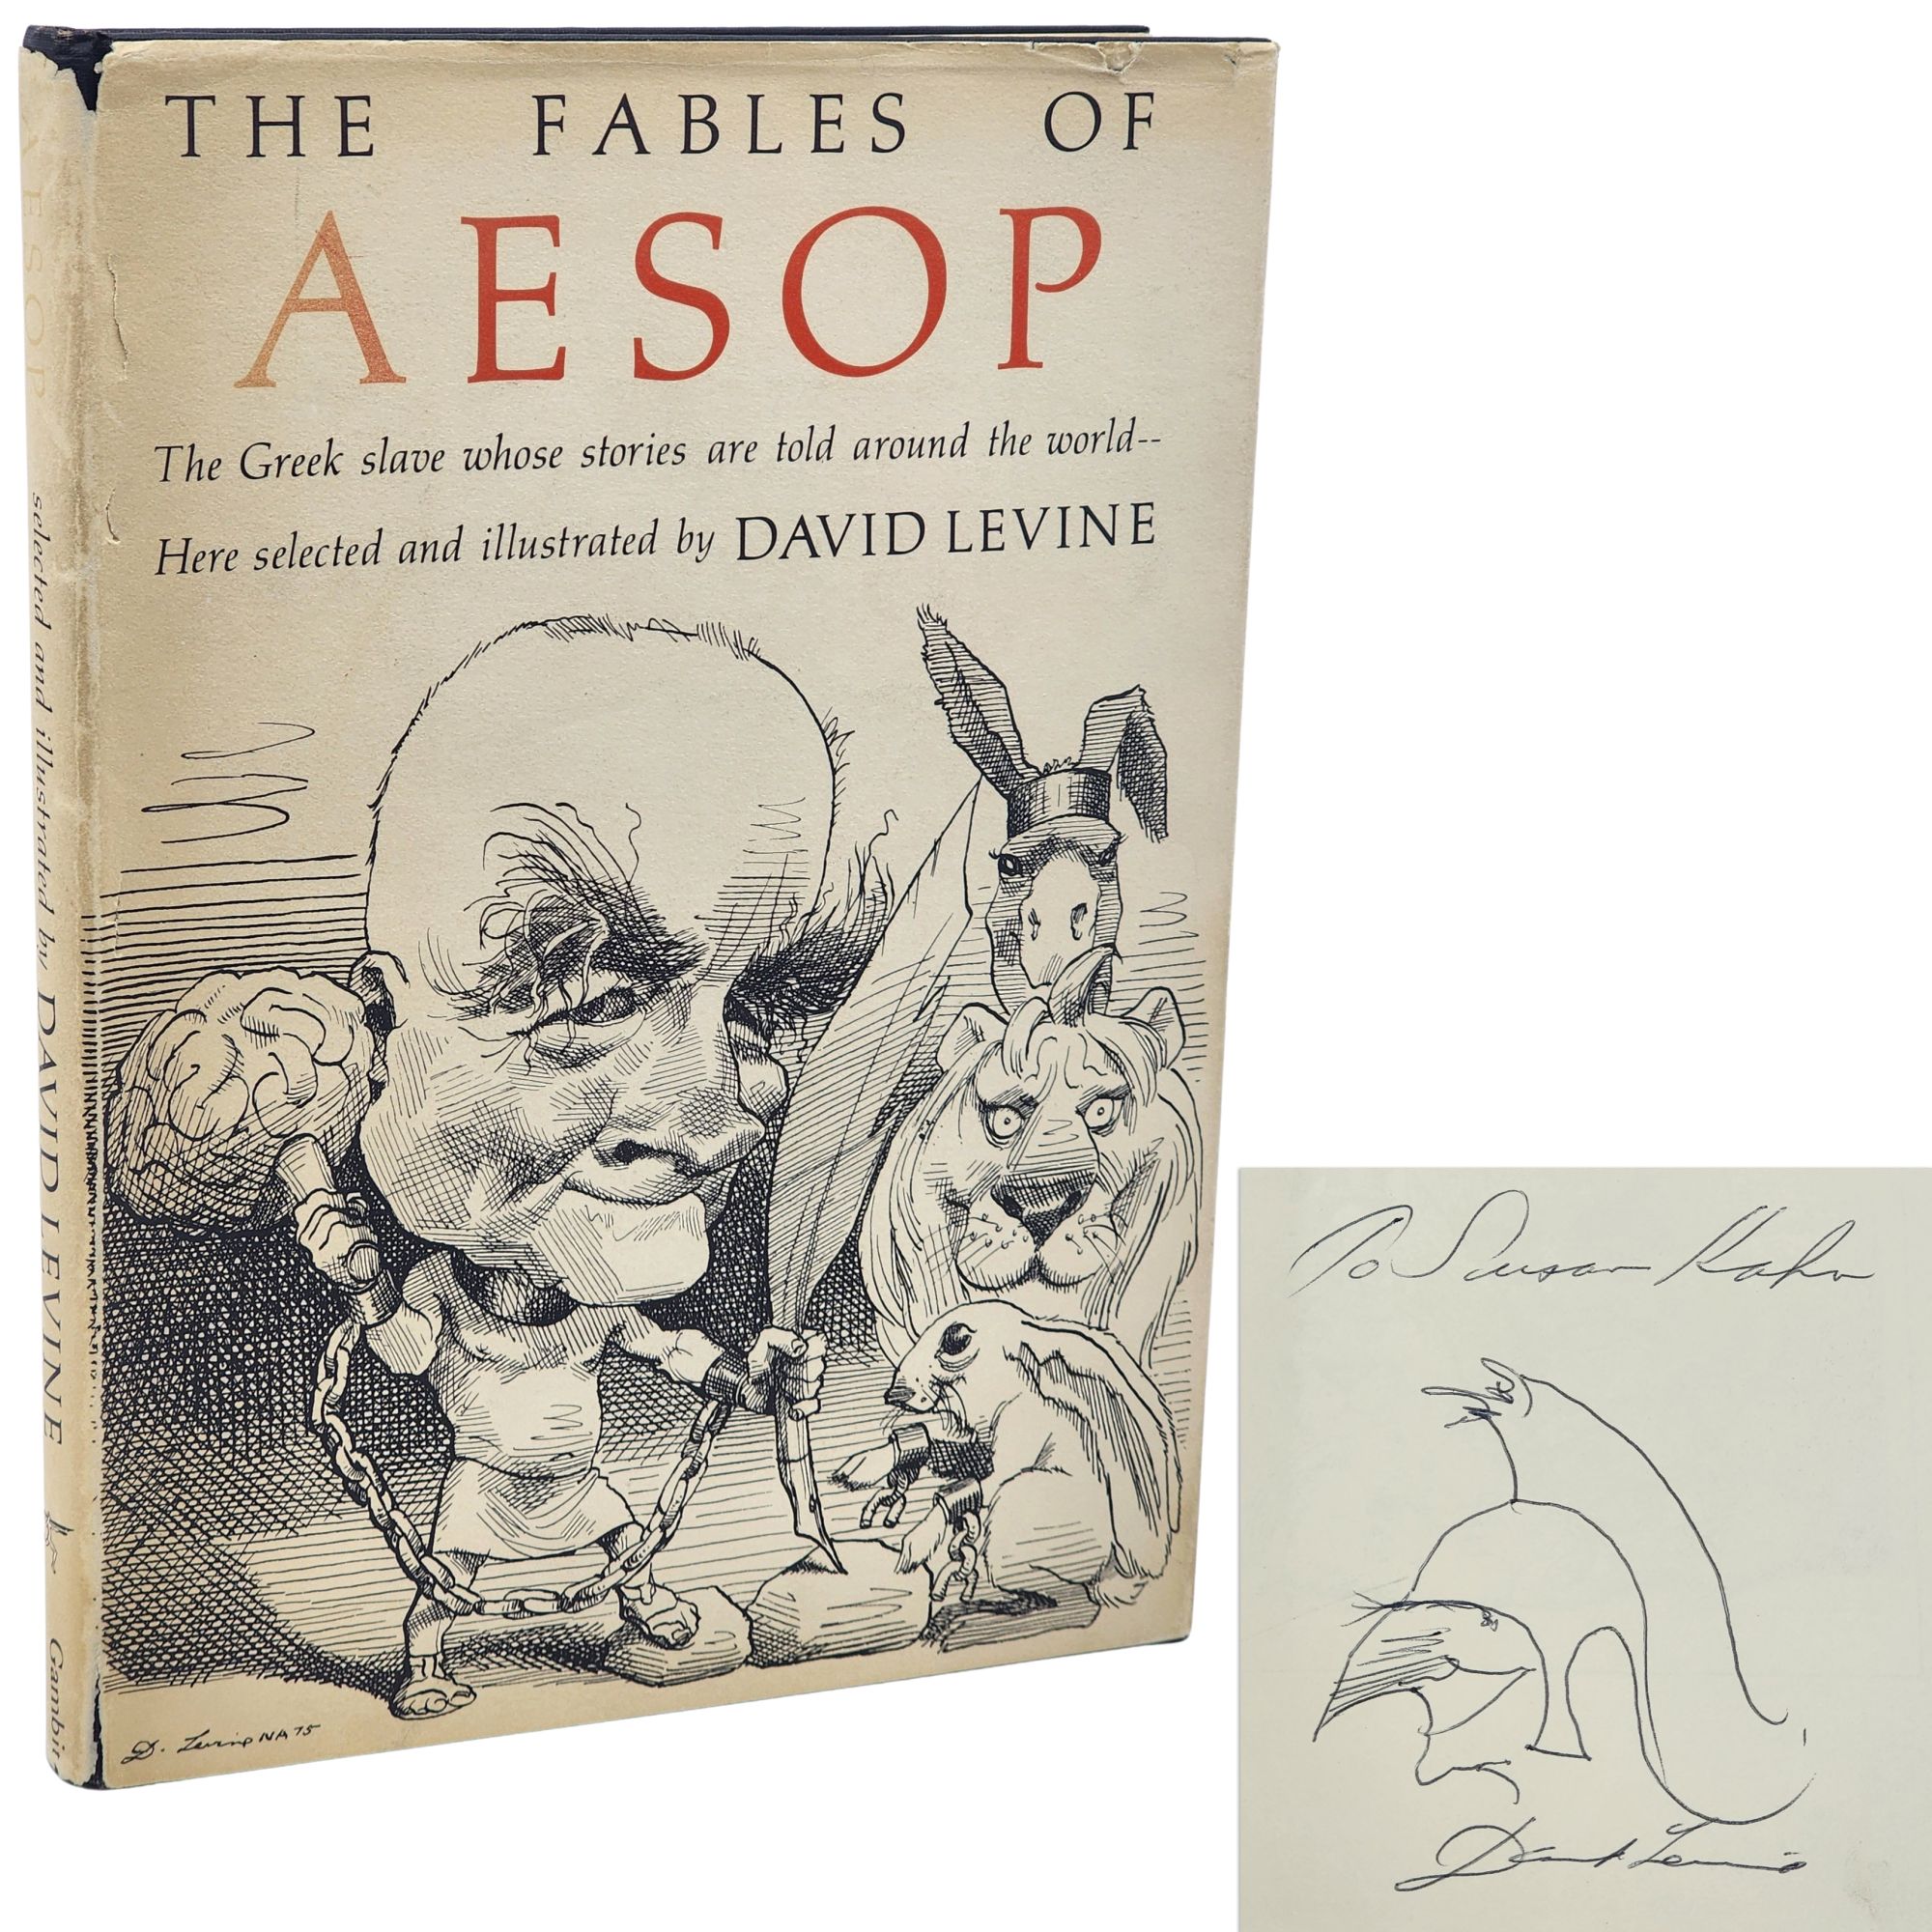 [Book #30259] THE FABLES OF AESOP. David Levine.